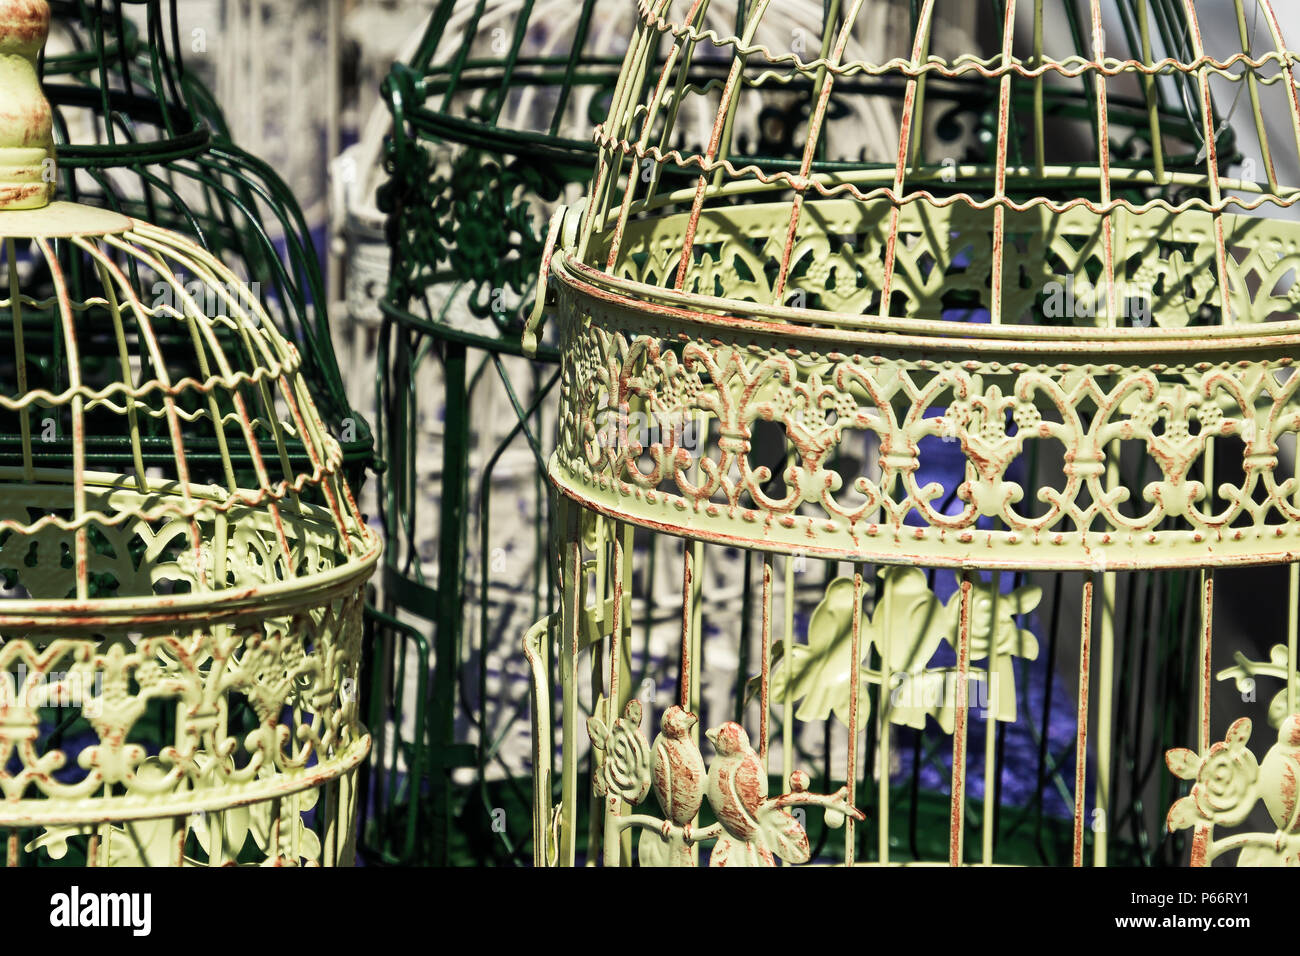 Antique bird cages decorated with ornaments at a flea market, Germany Stock  Photo - Alamy